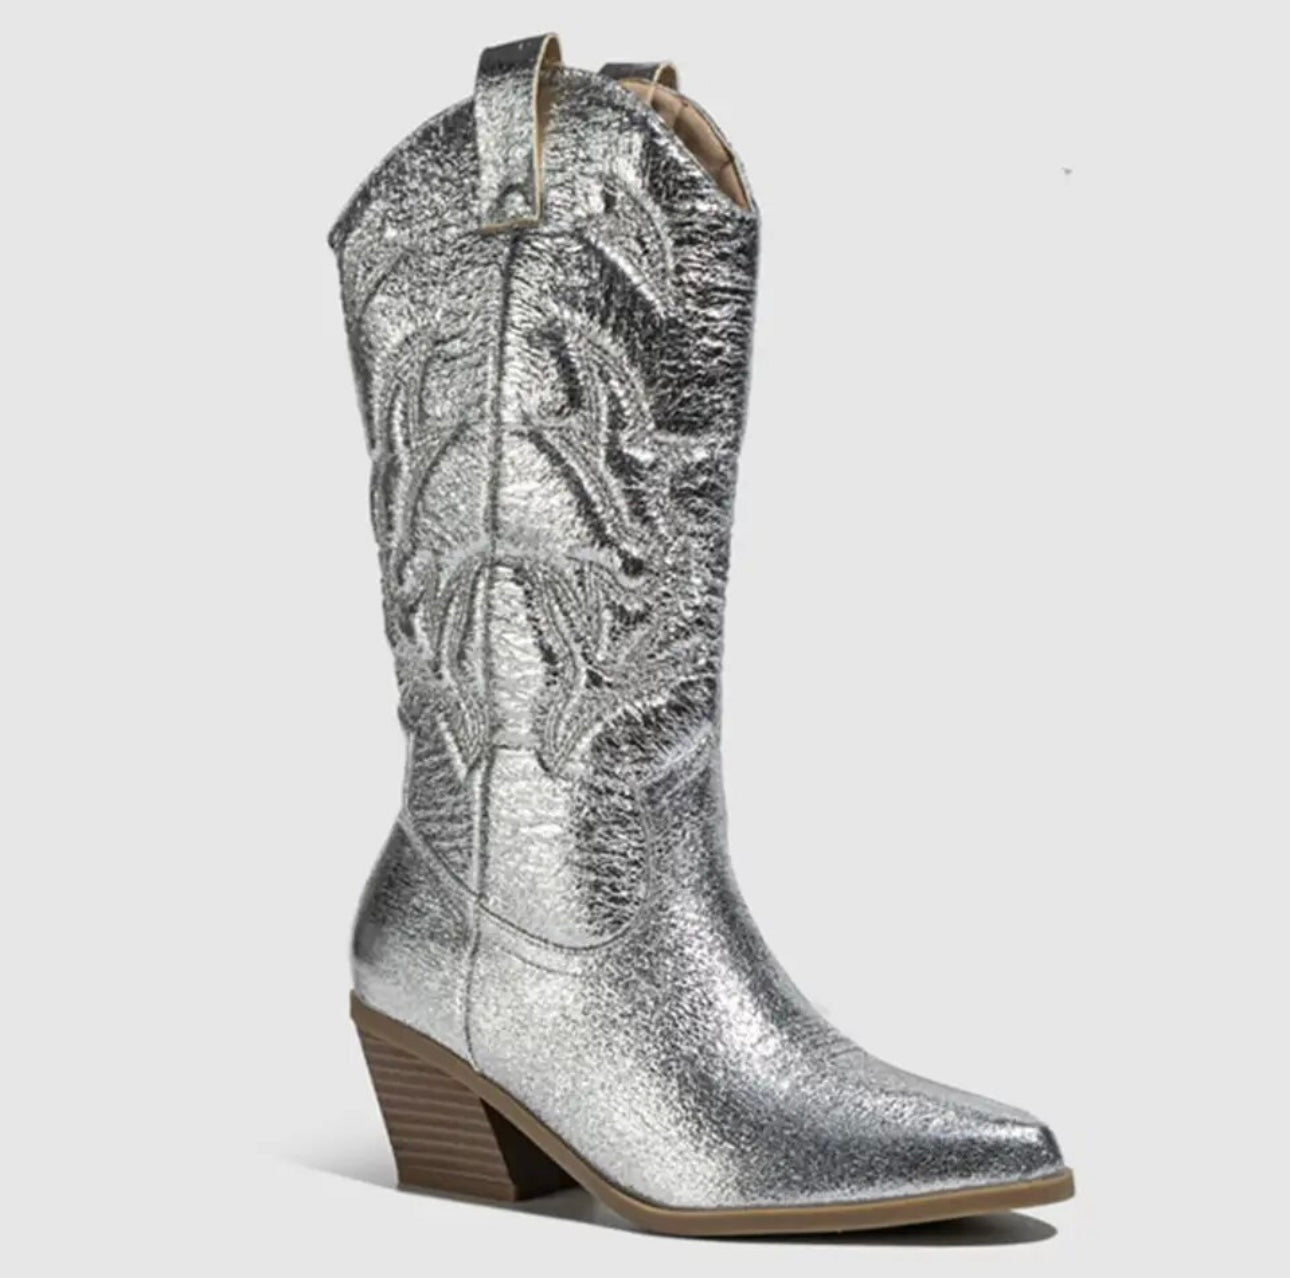 The Glitz & Glam Boots (Comes In Other Colors)